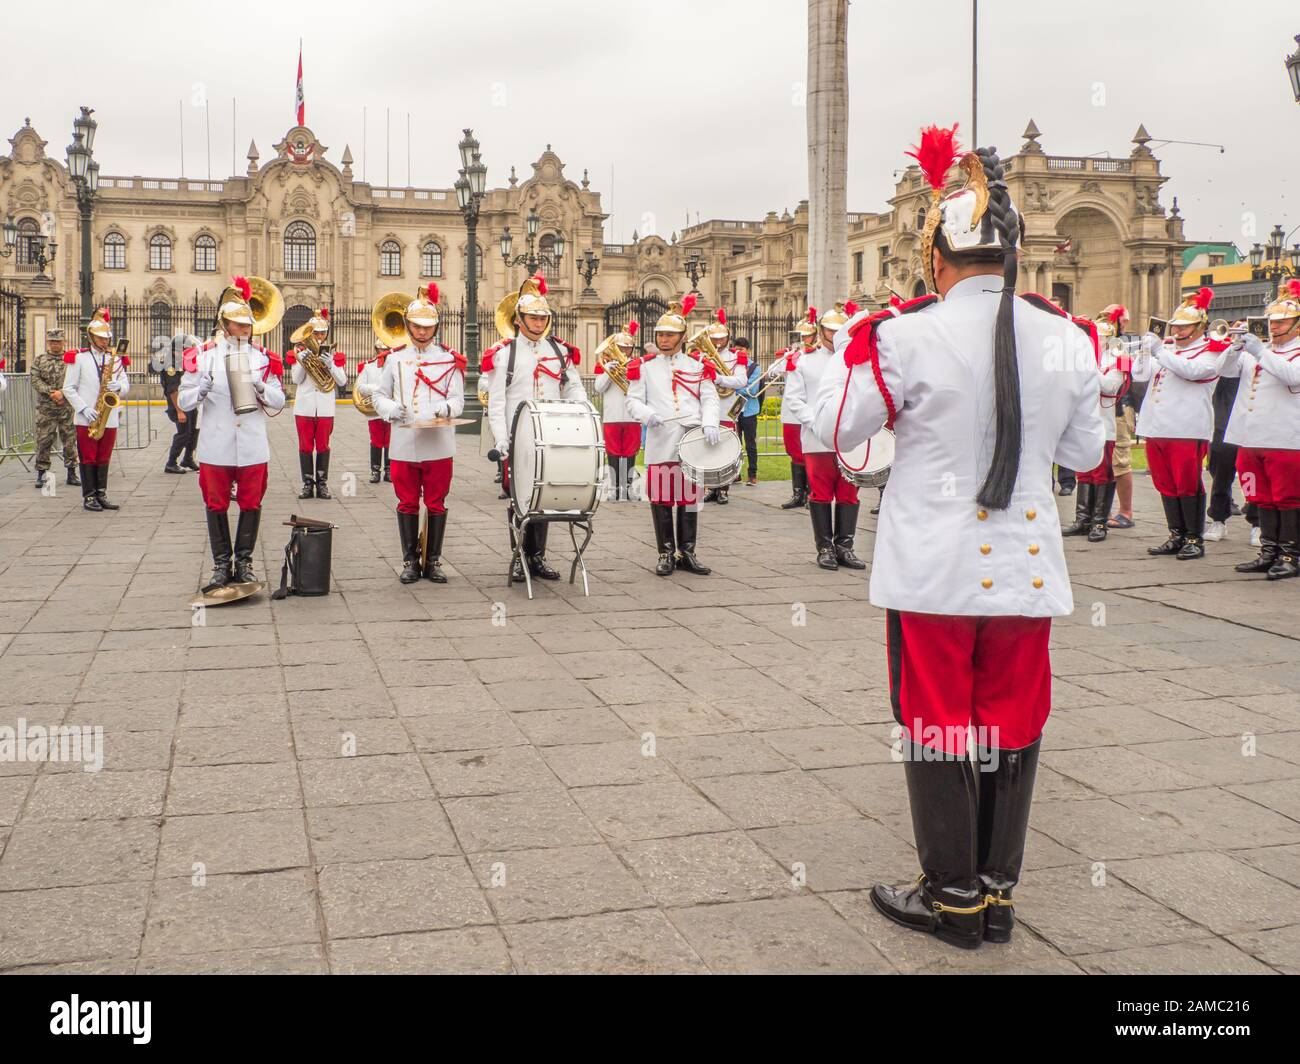 Lima, Peru - December 12, 2019: Guards of the Presidential Palace are giving a concert on the Plaza de Armas before changing of the guards ceremony. S Stock Photo